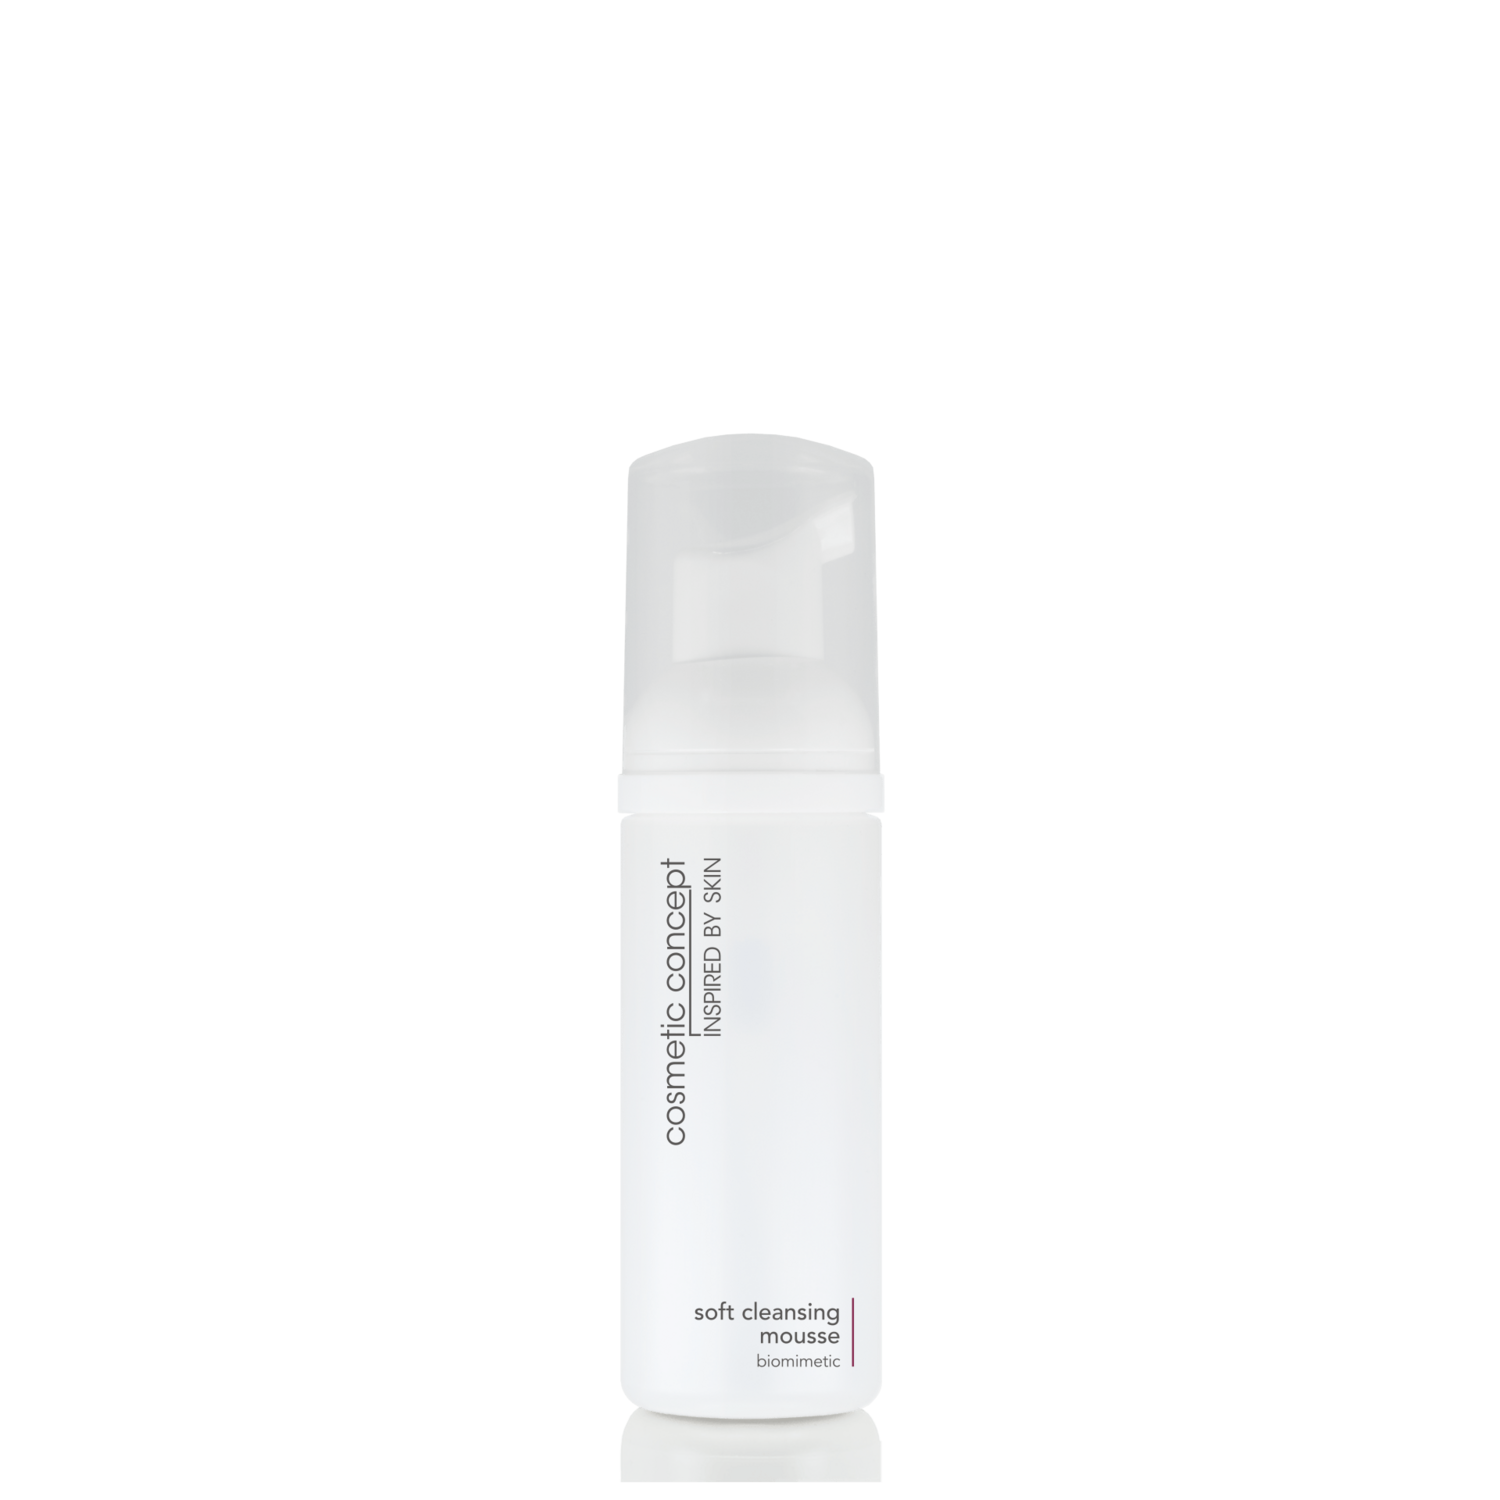 soft cleansing mousse
biomimetic